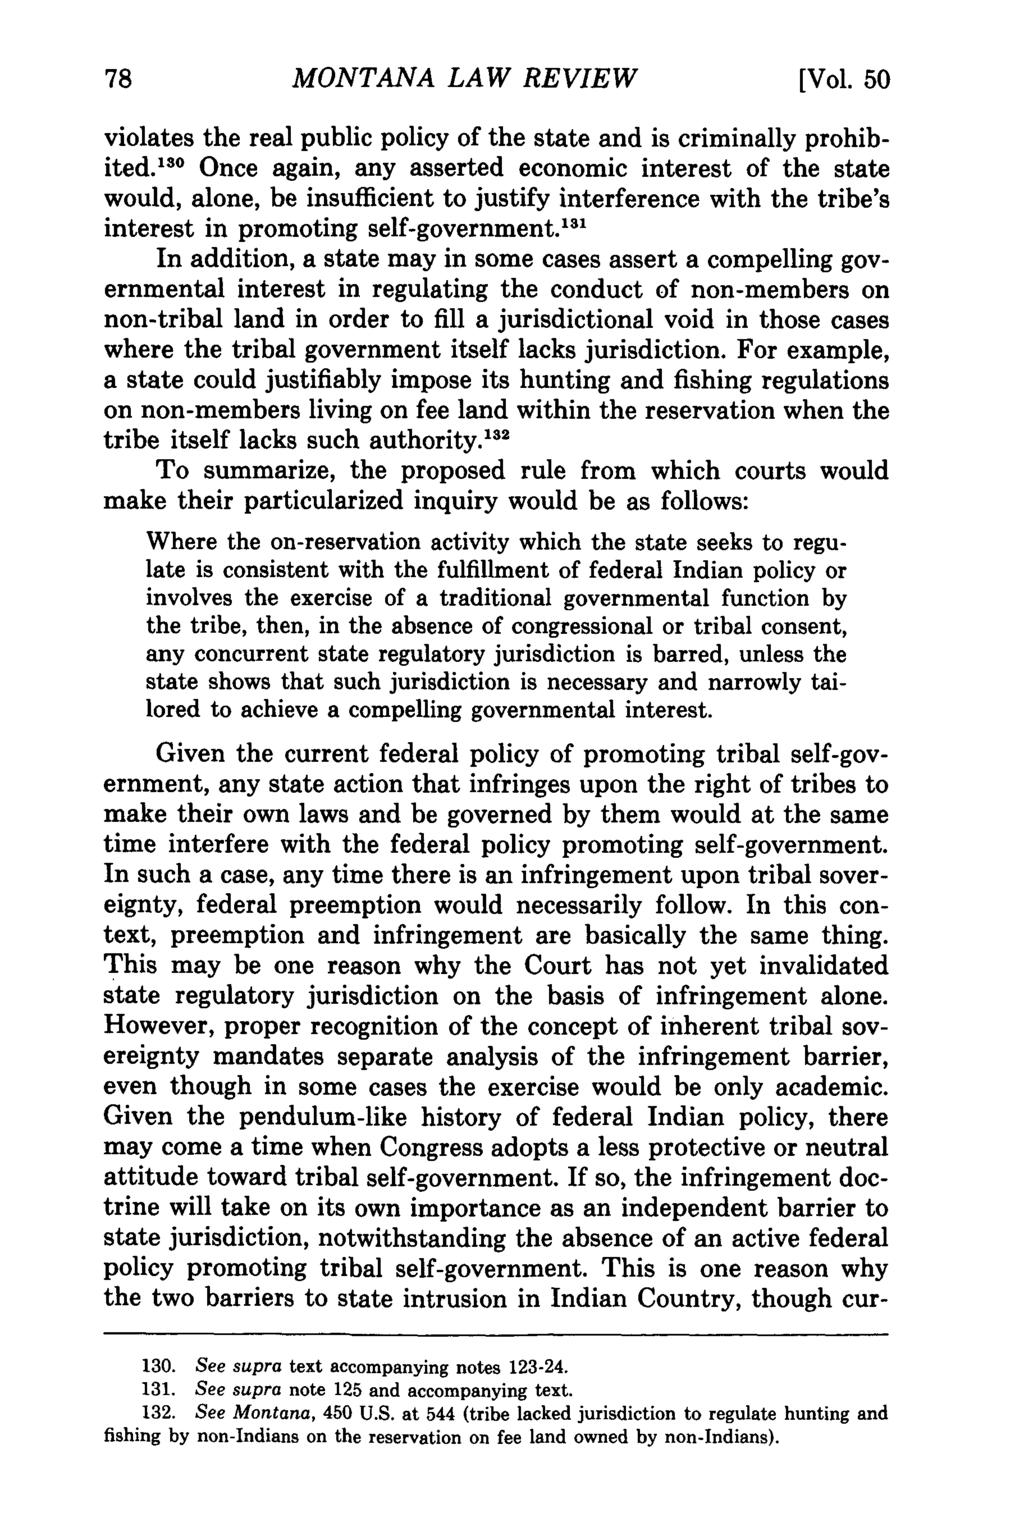 Montana Law Review, Vol. 50 [1989], Iss. 1, Art. 3 MONTANA LAW REVIEW [Vol. 50 violates the real public policy of the state and is criminally prohibited.